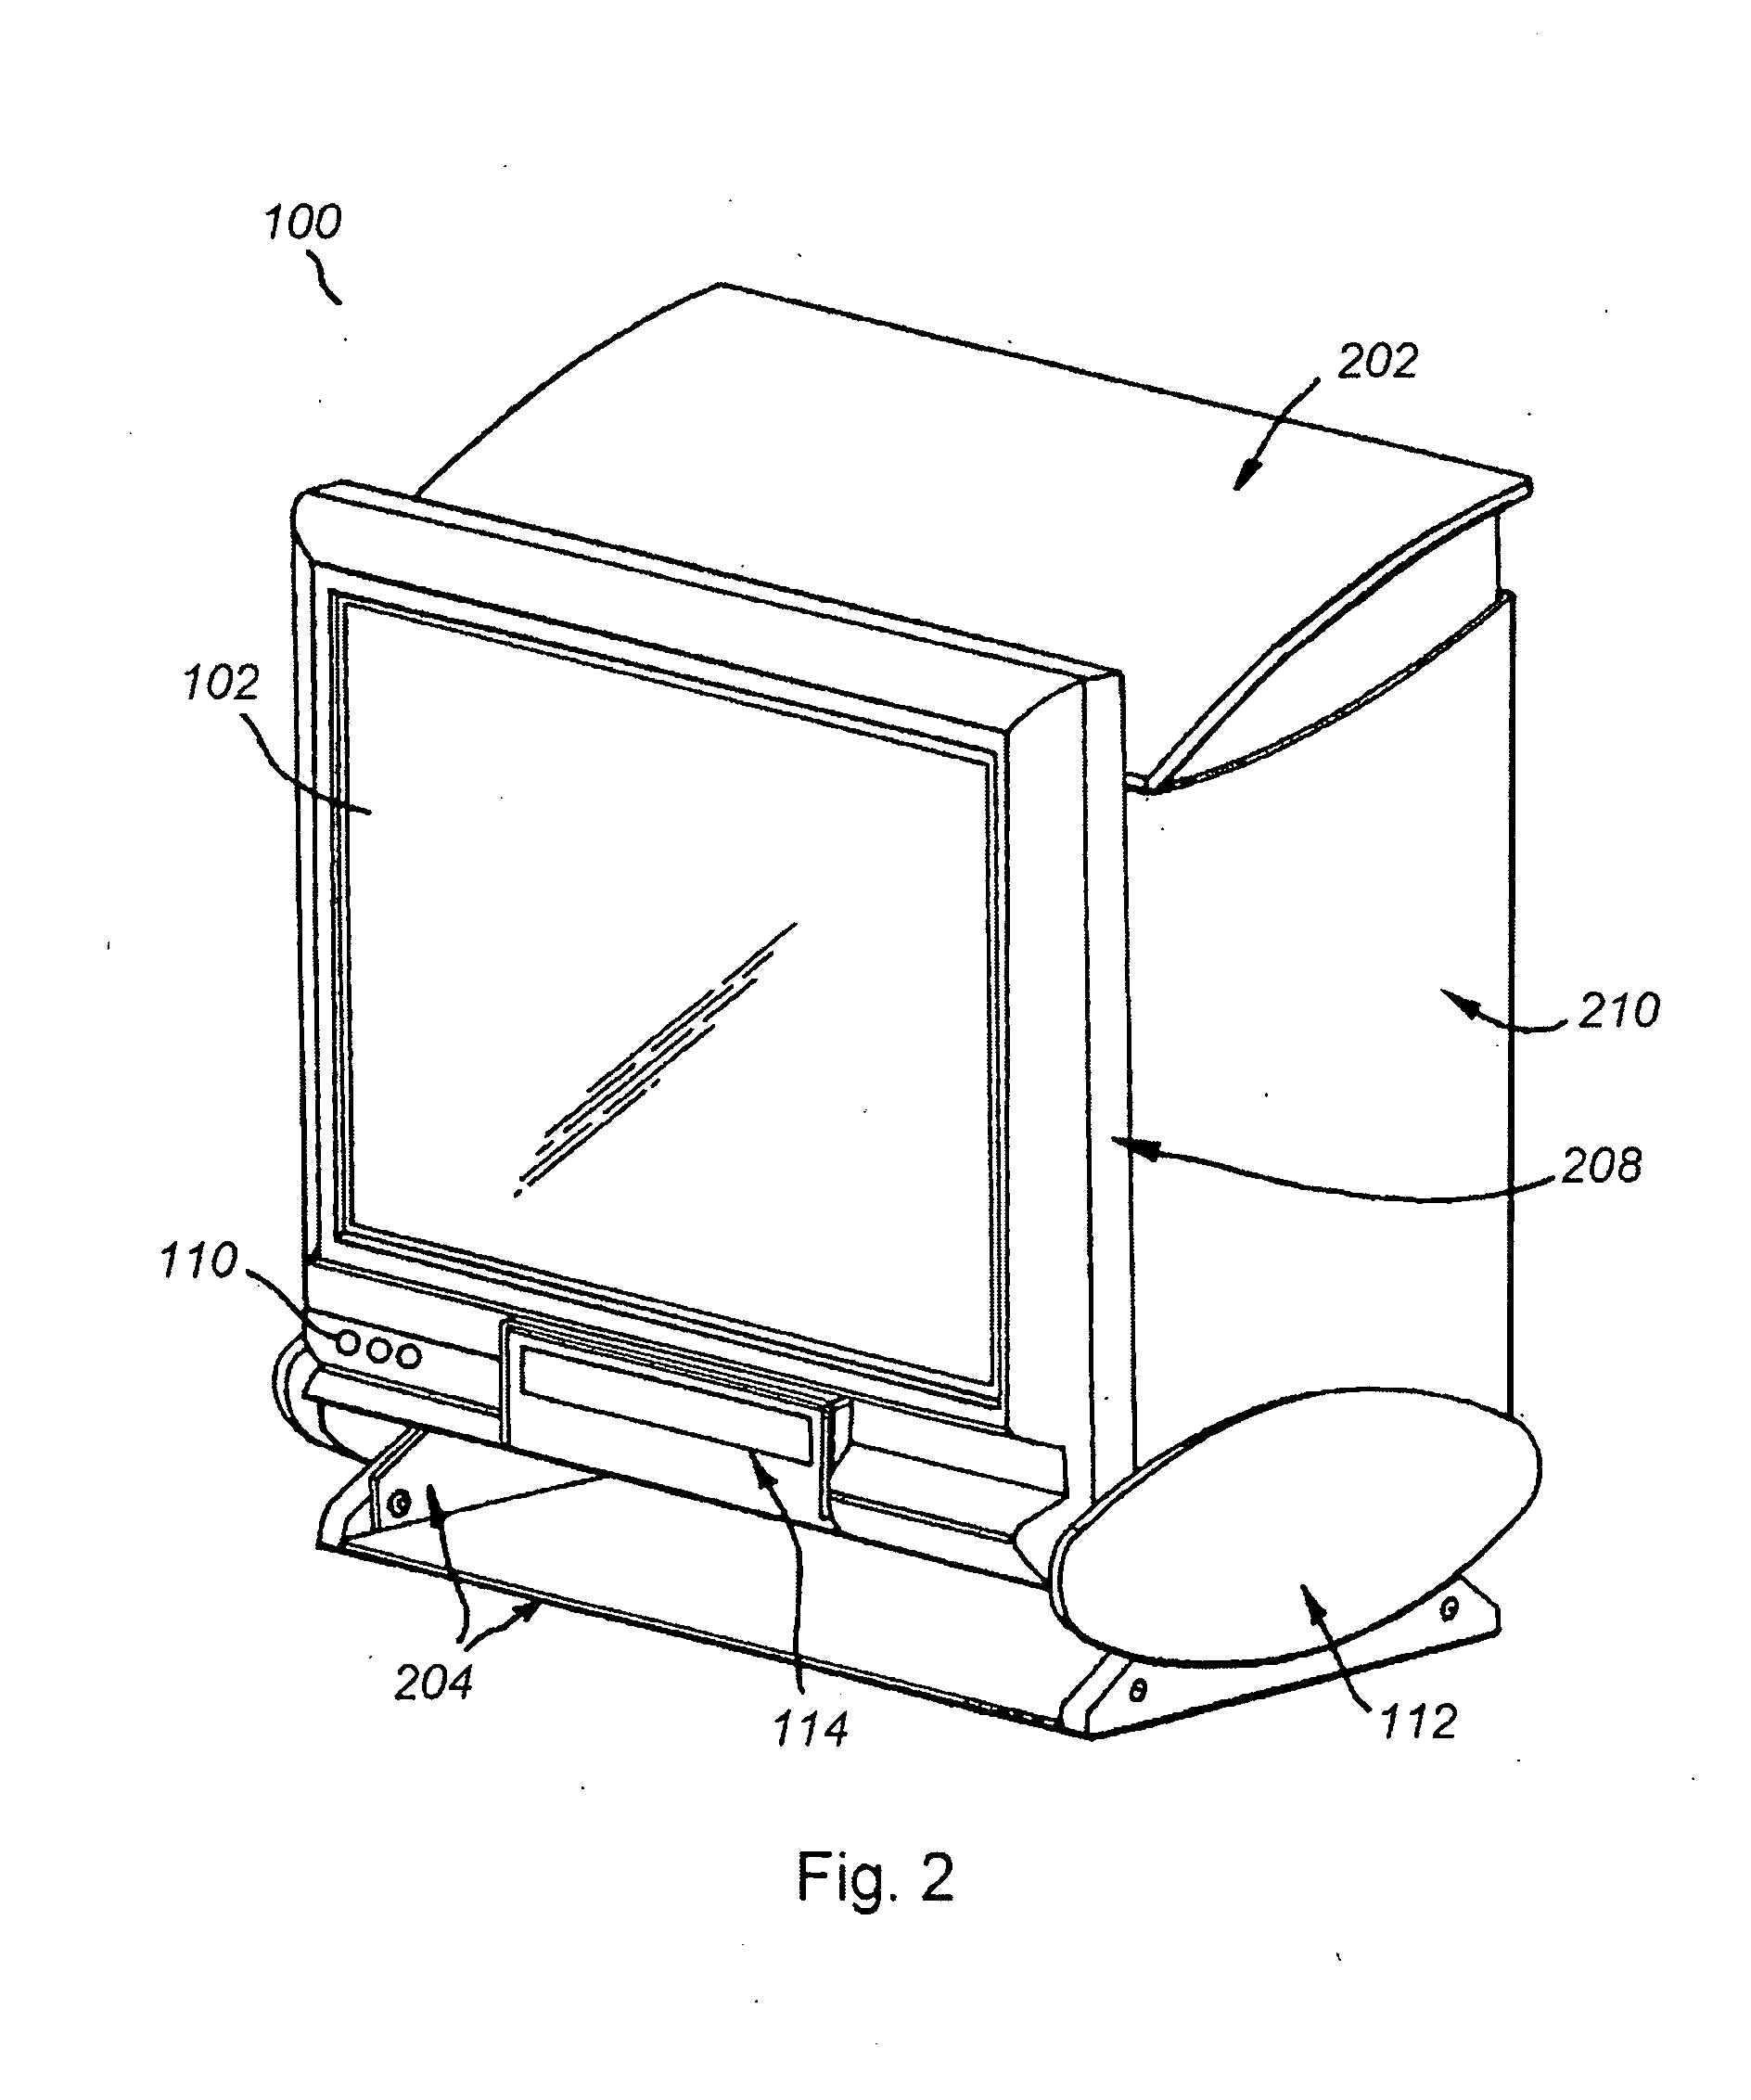 Child-oriented computing system